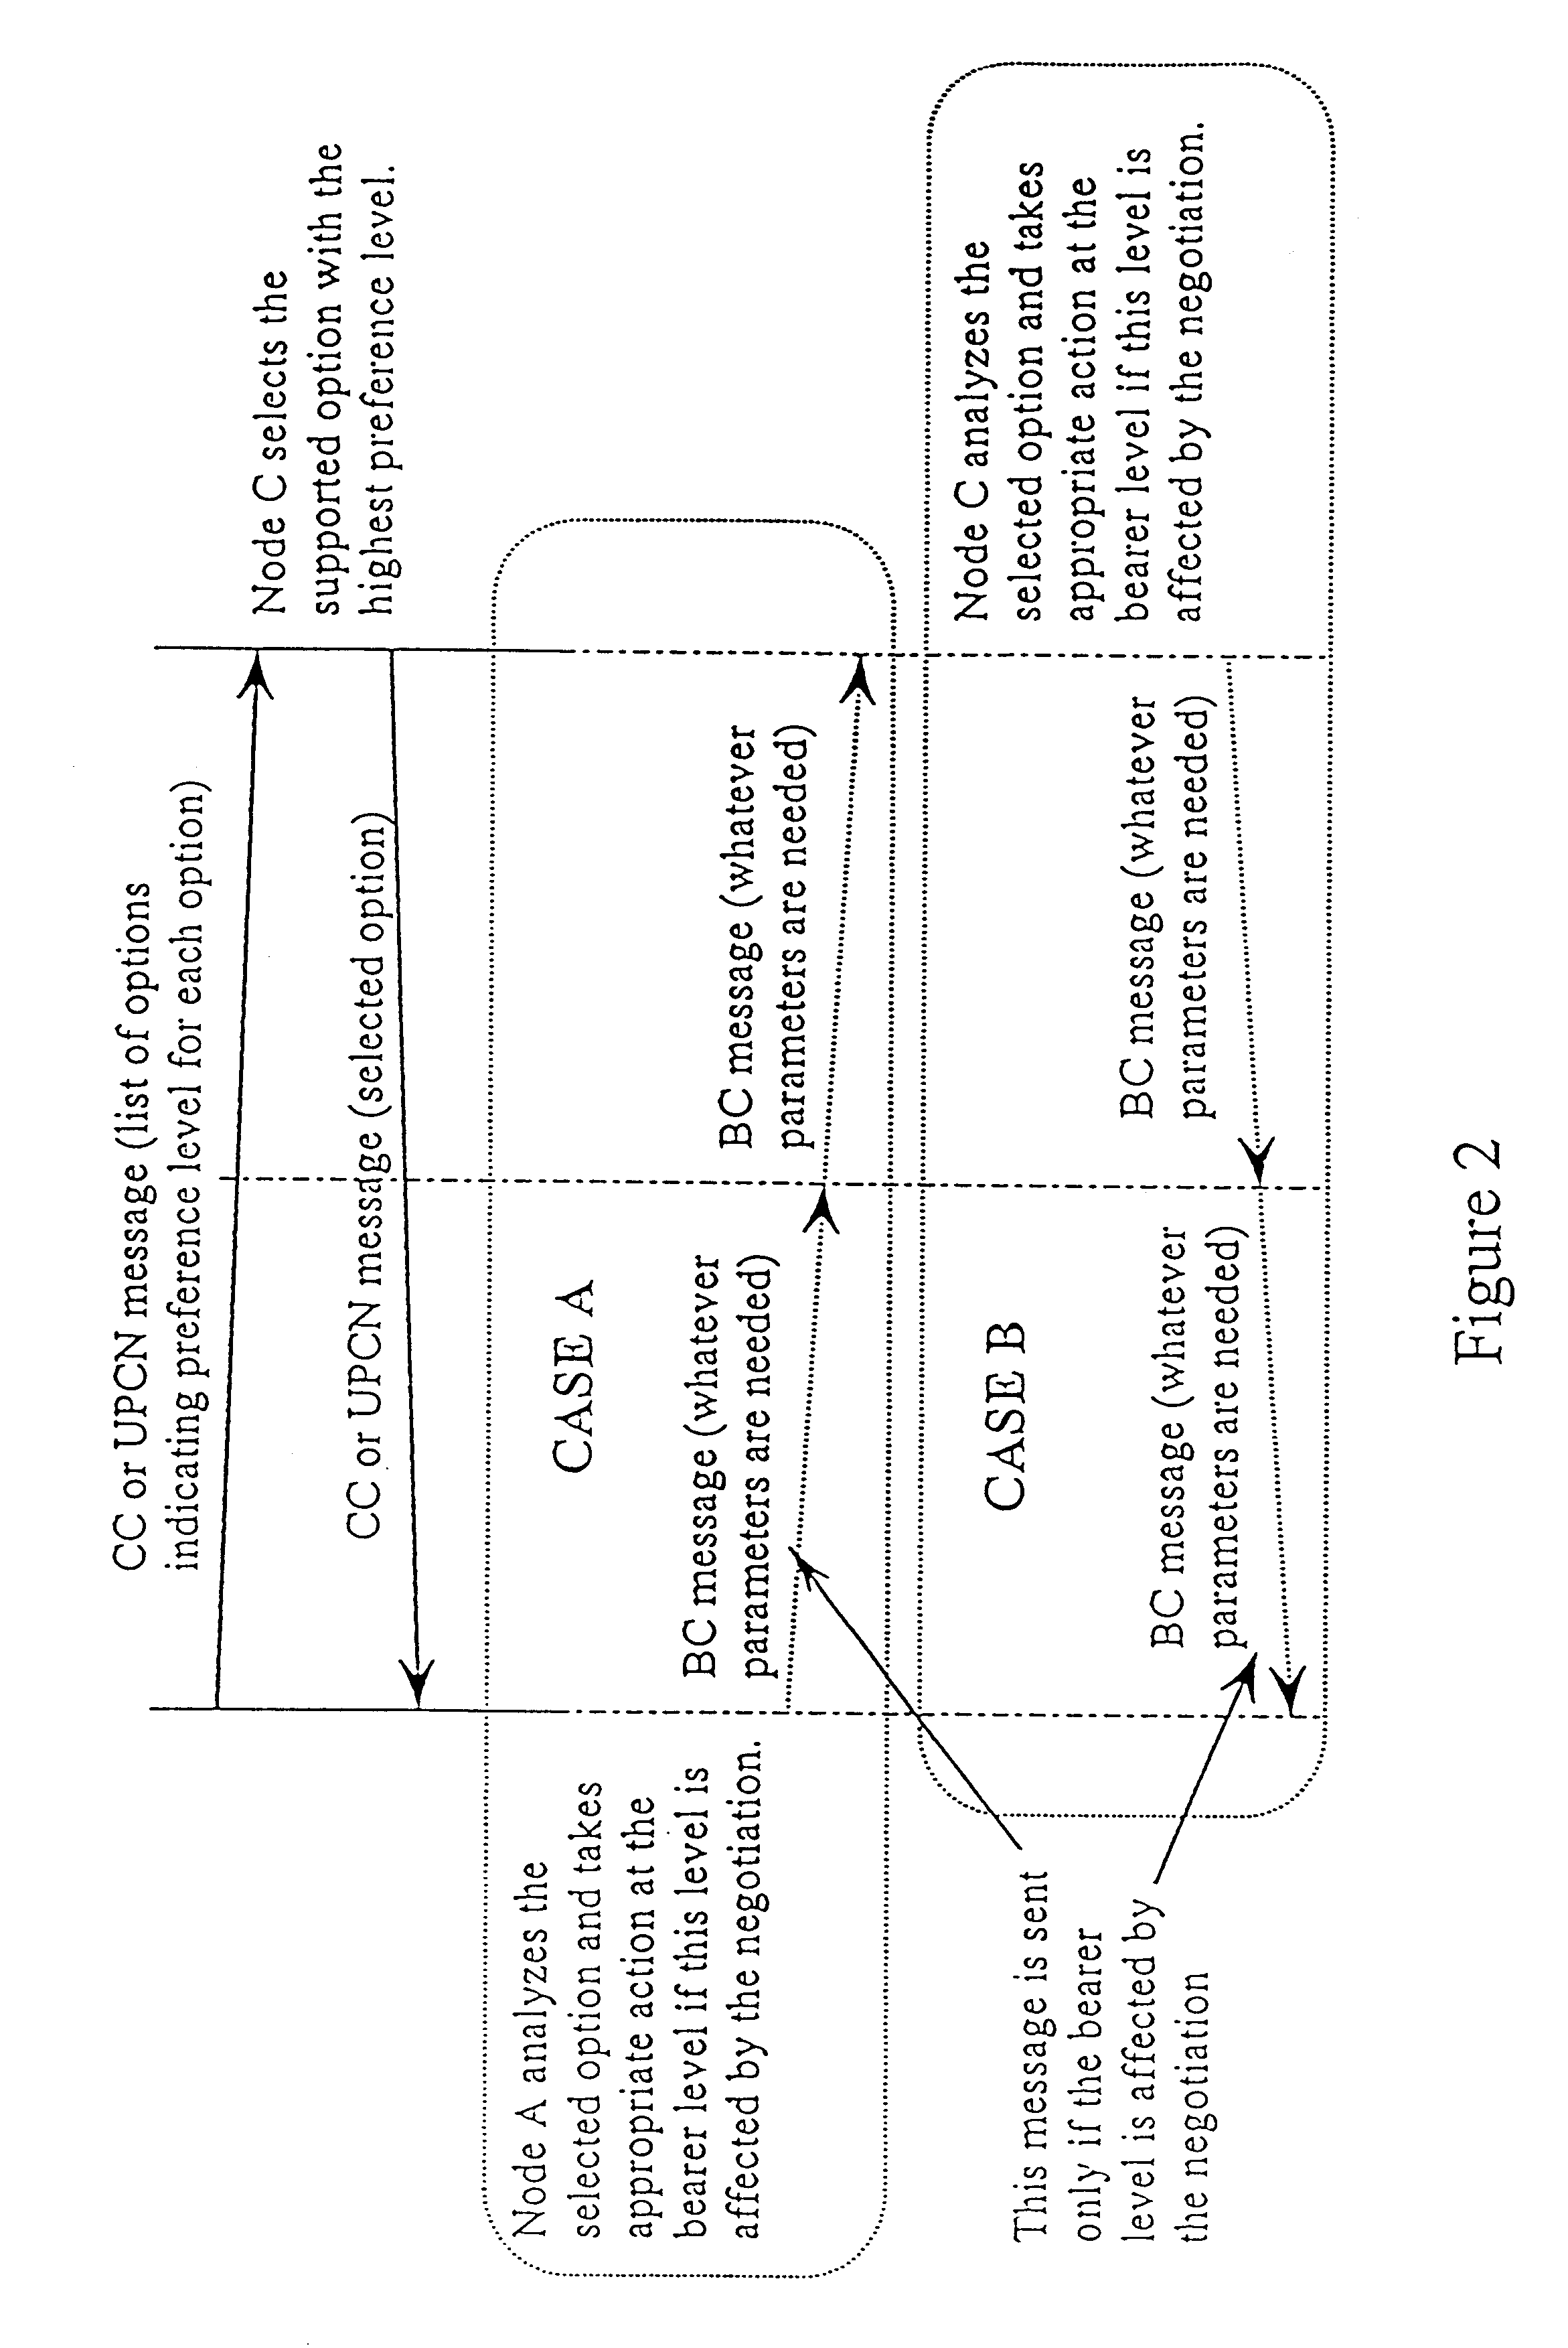 Capability negotiation in a telecommunications network